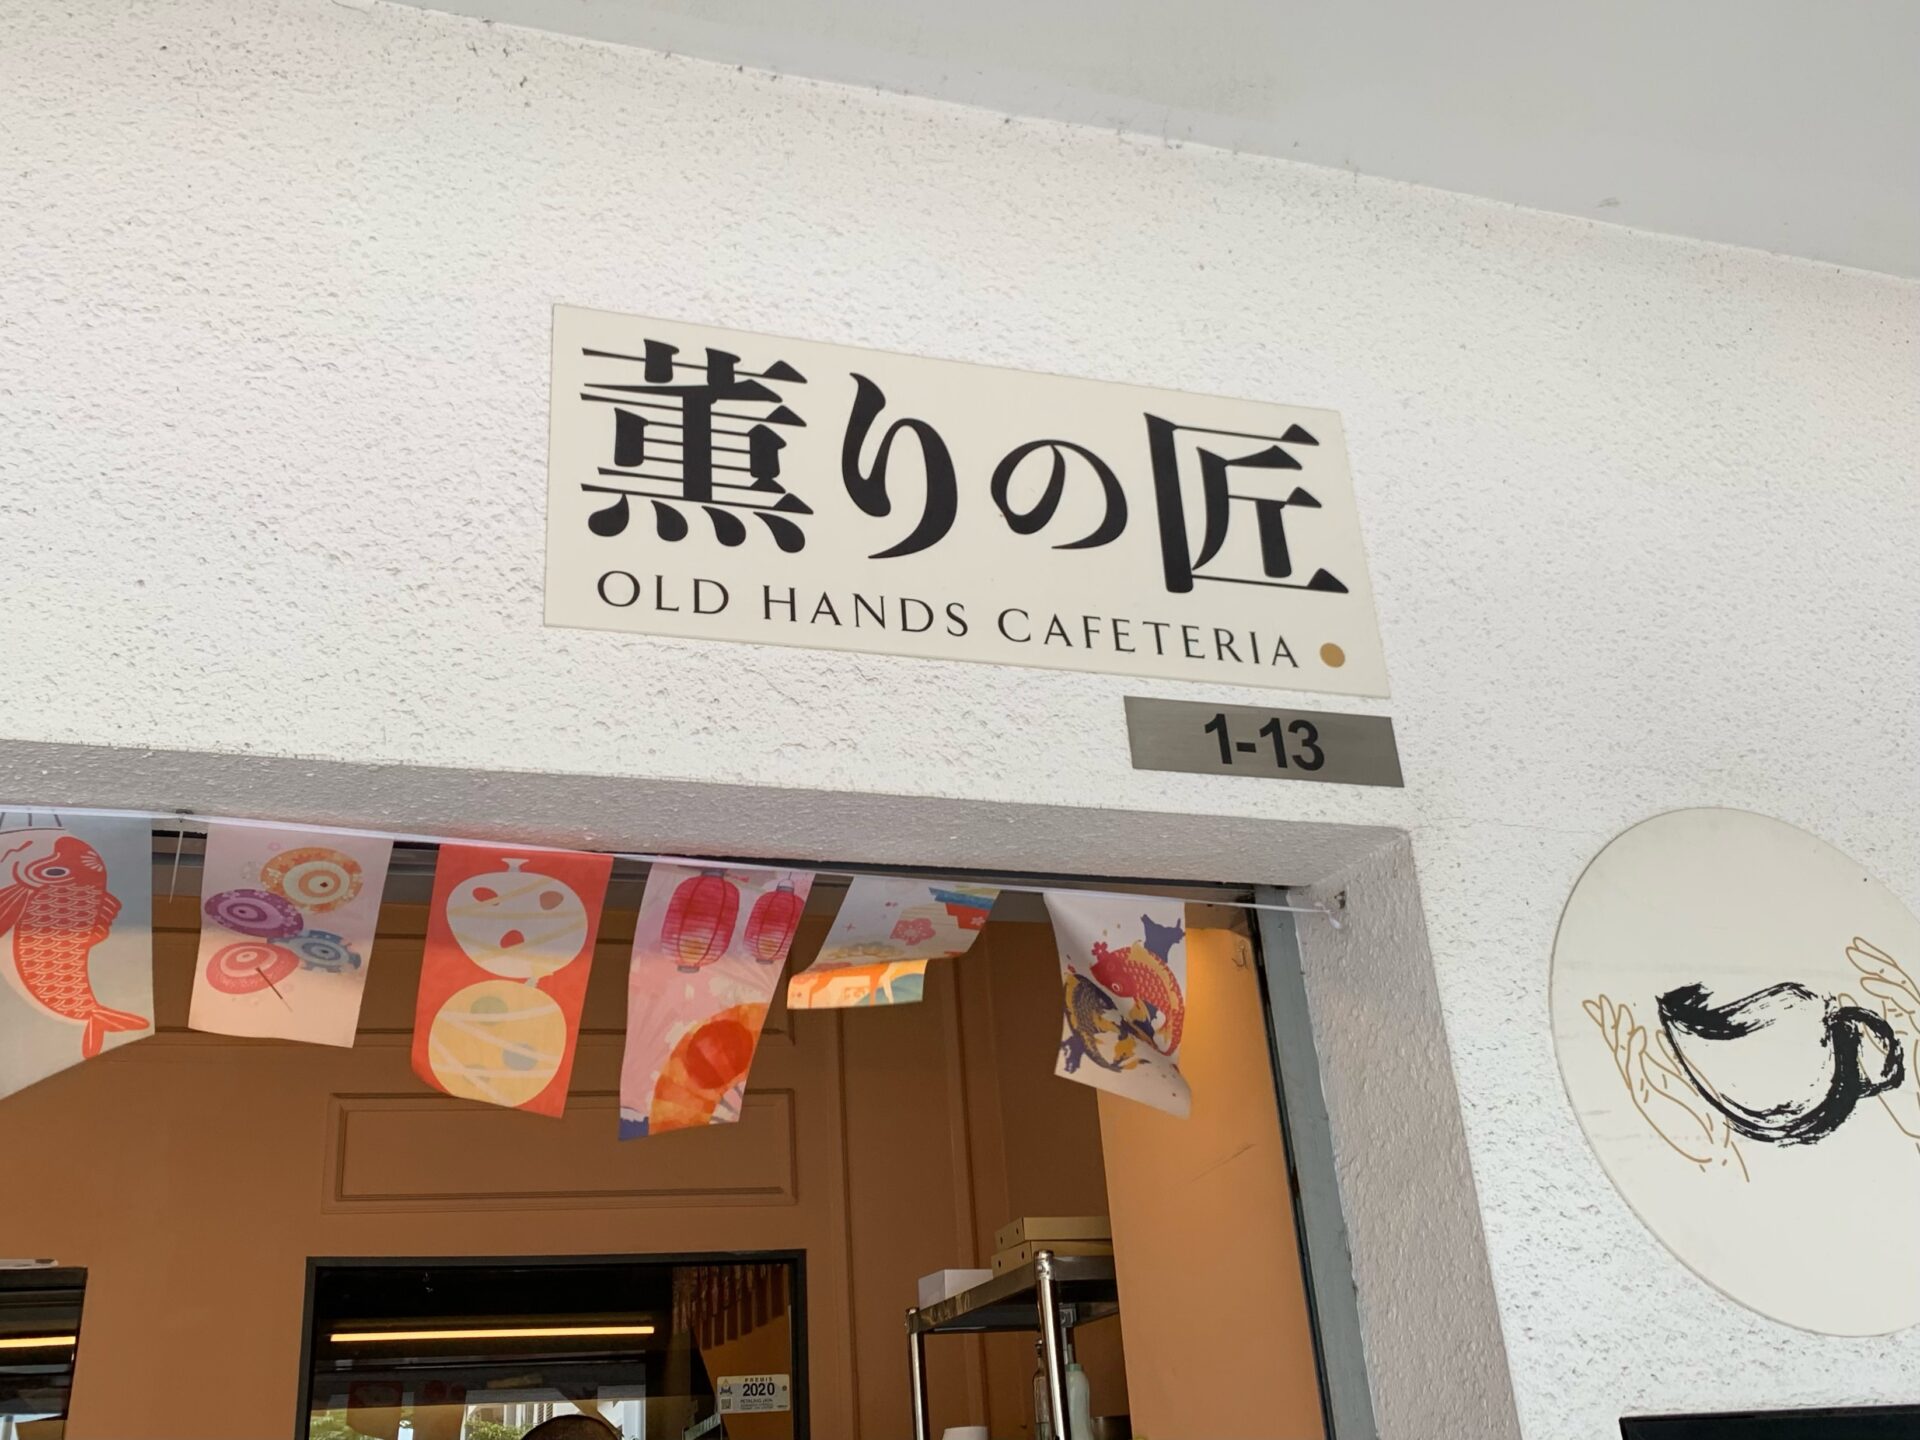 Old Hands Cafeteria - Store signage